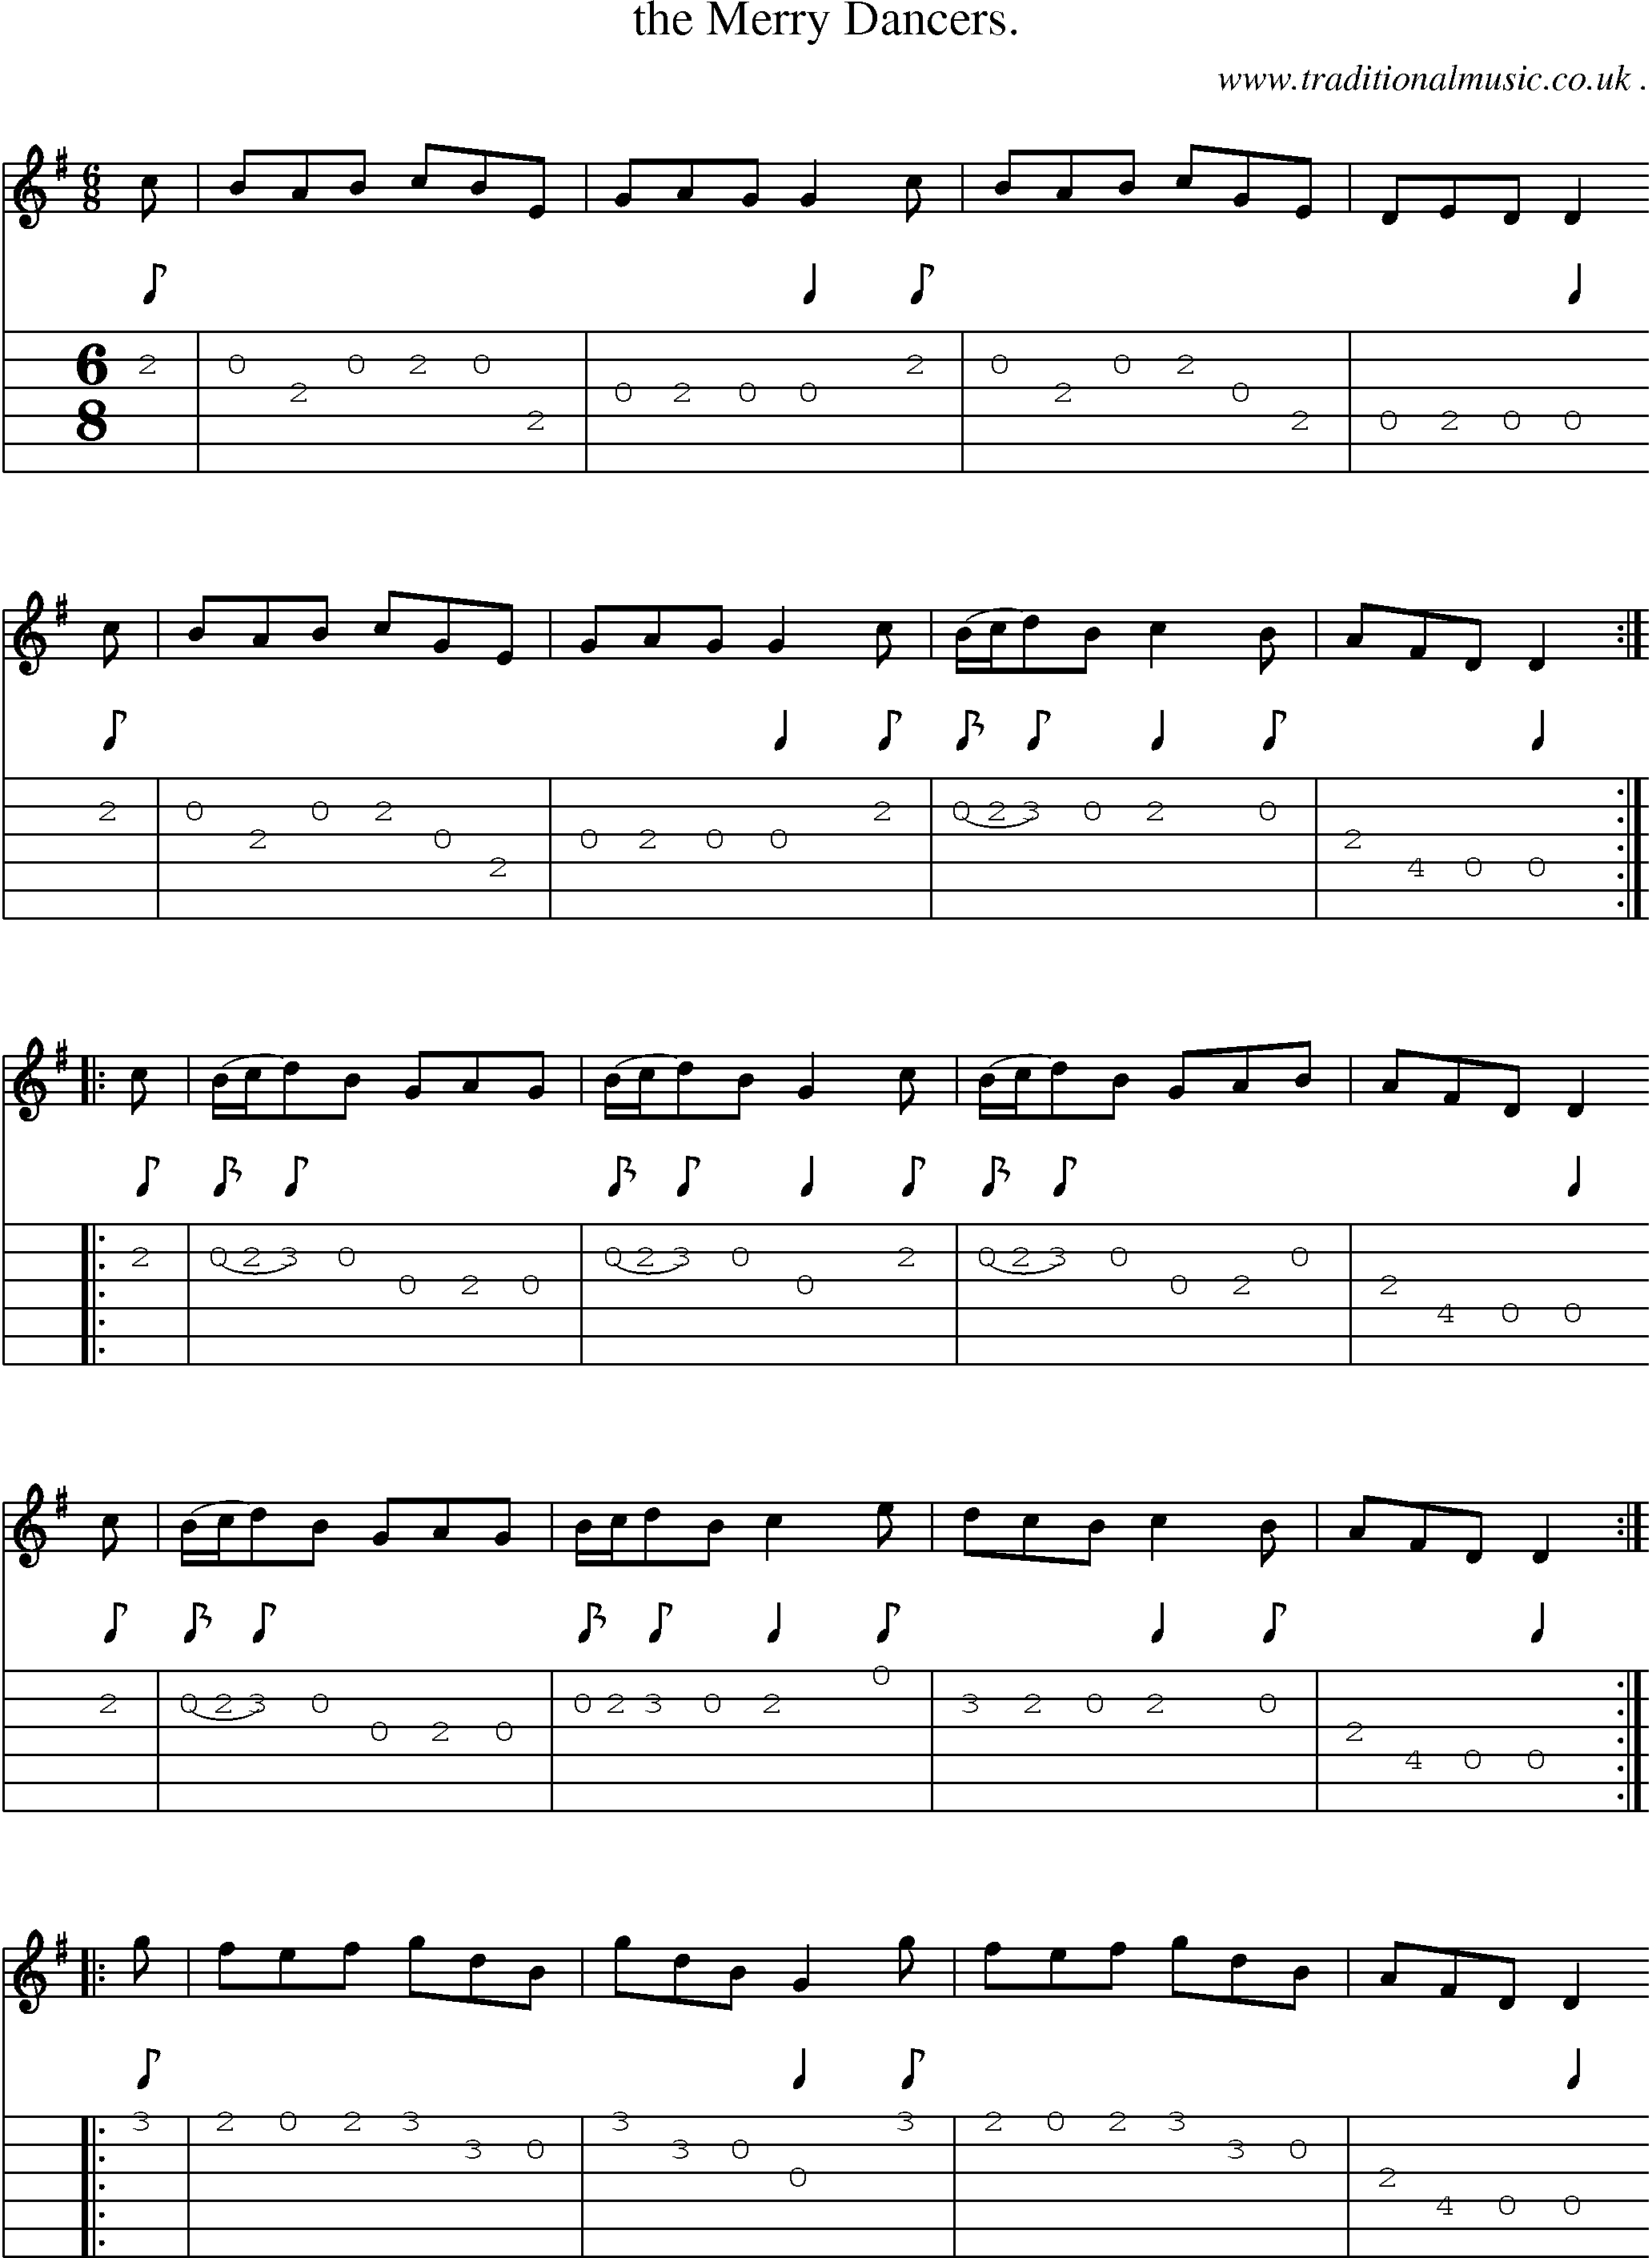 Sheet-Music and Guitar Tabs for The Merry Dancers